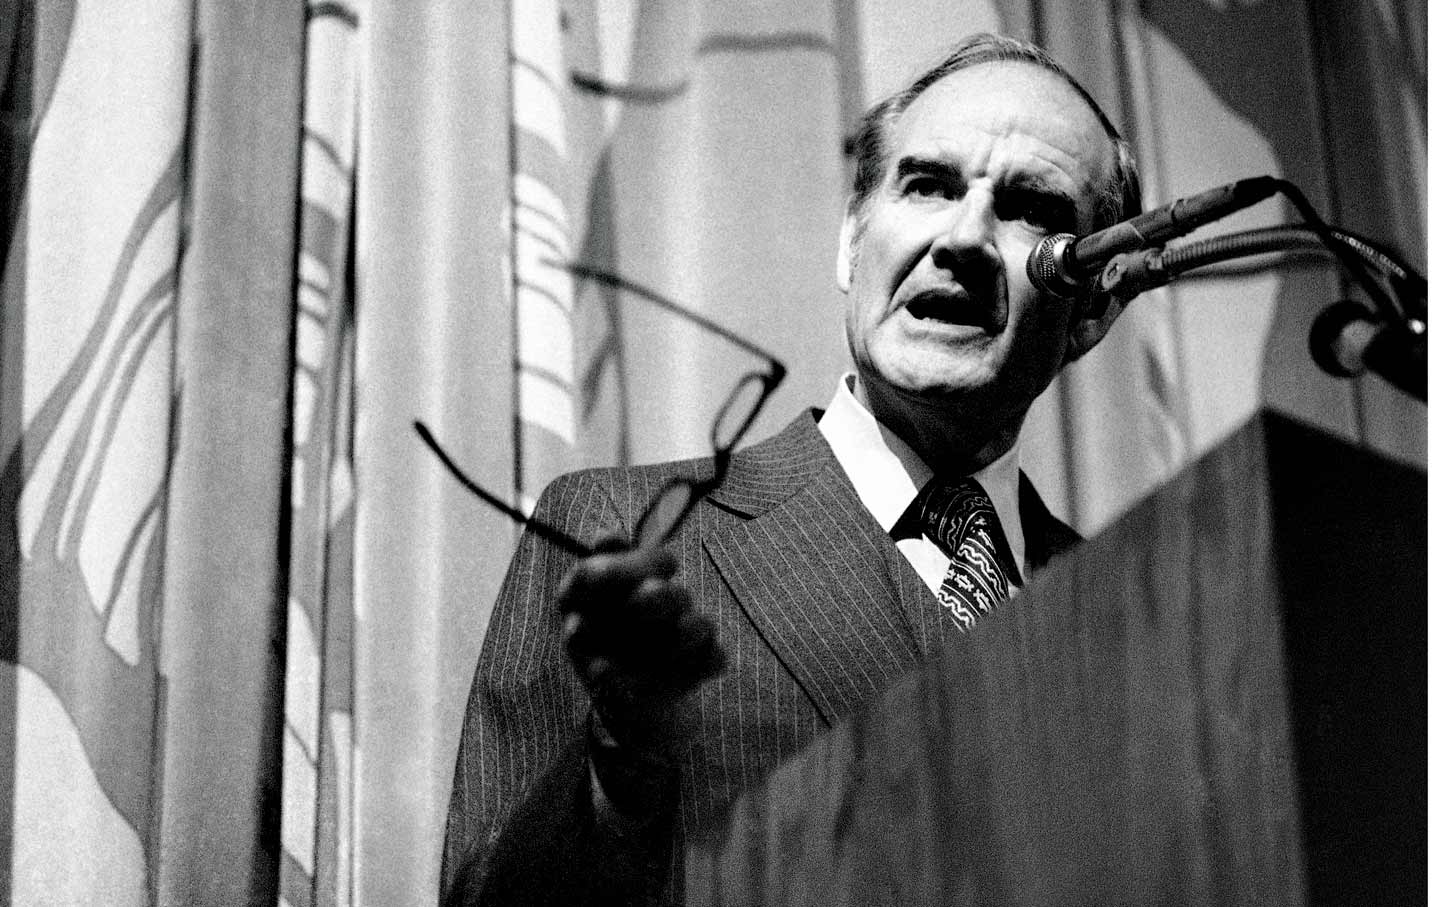 George McGovern’s Alternative Path for the Democratic Party